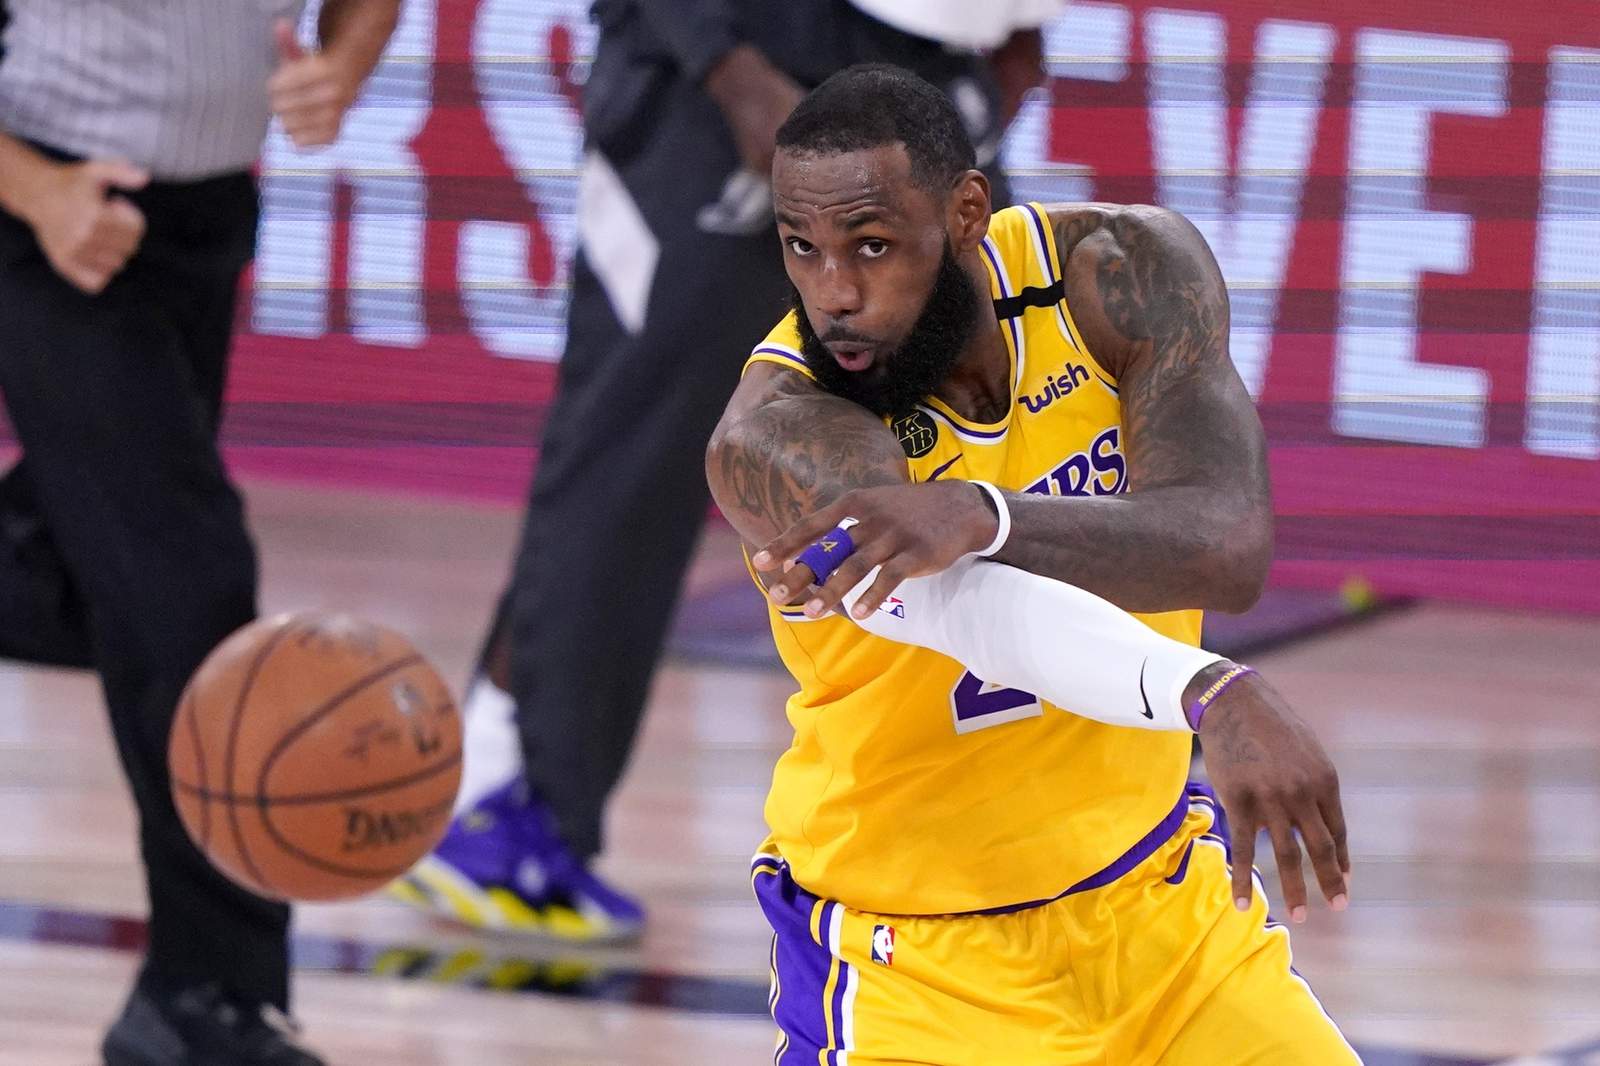 Lakers roll past Nuggets 126-114 in West finals opener